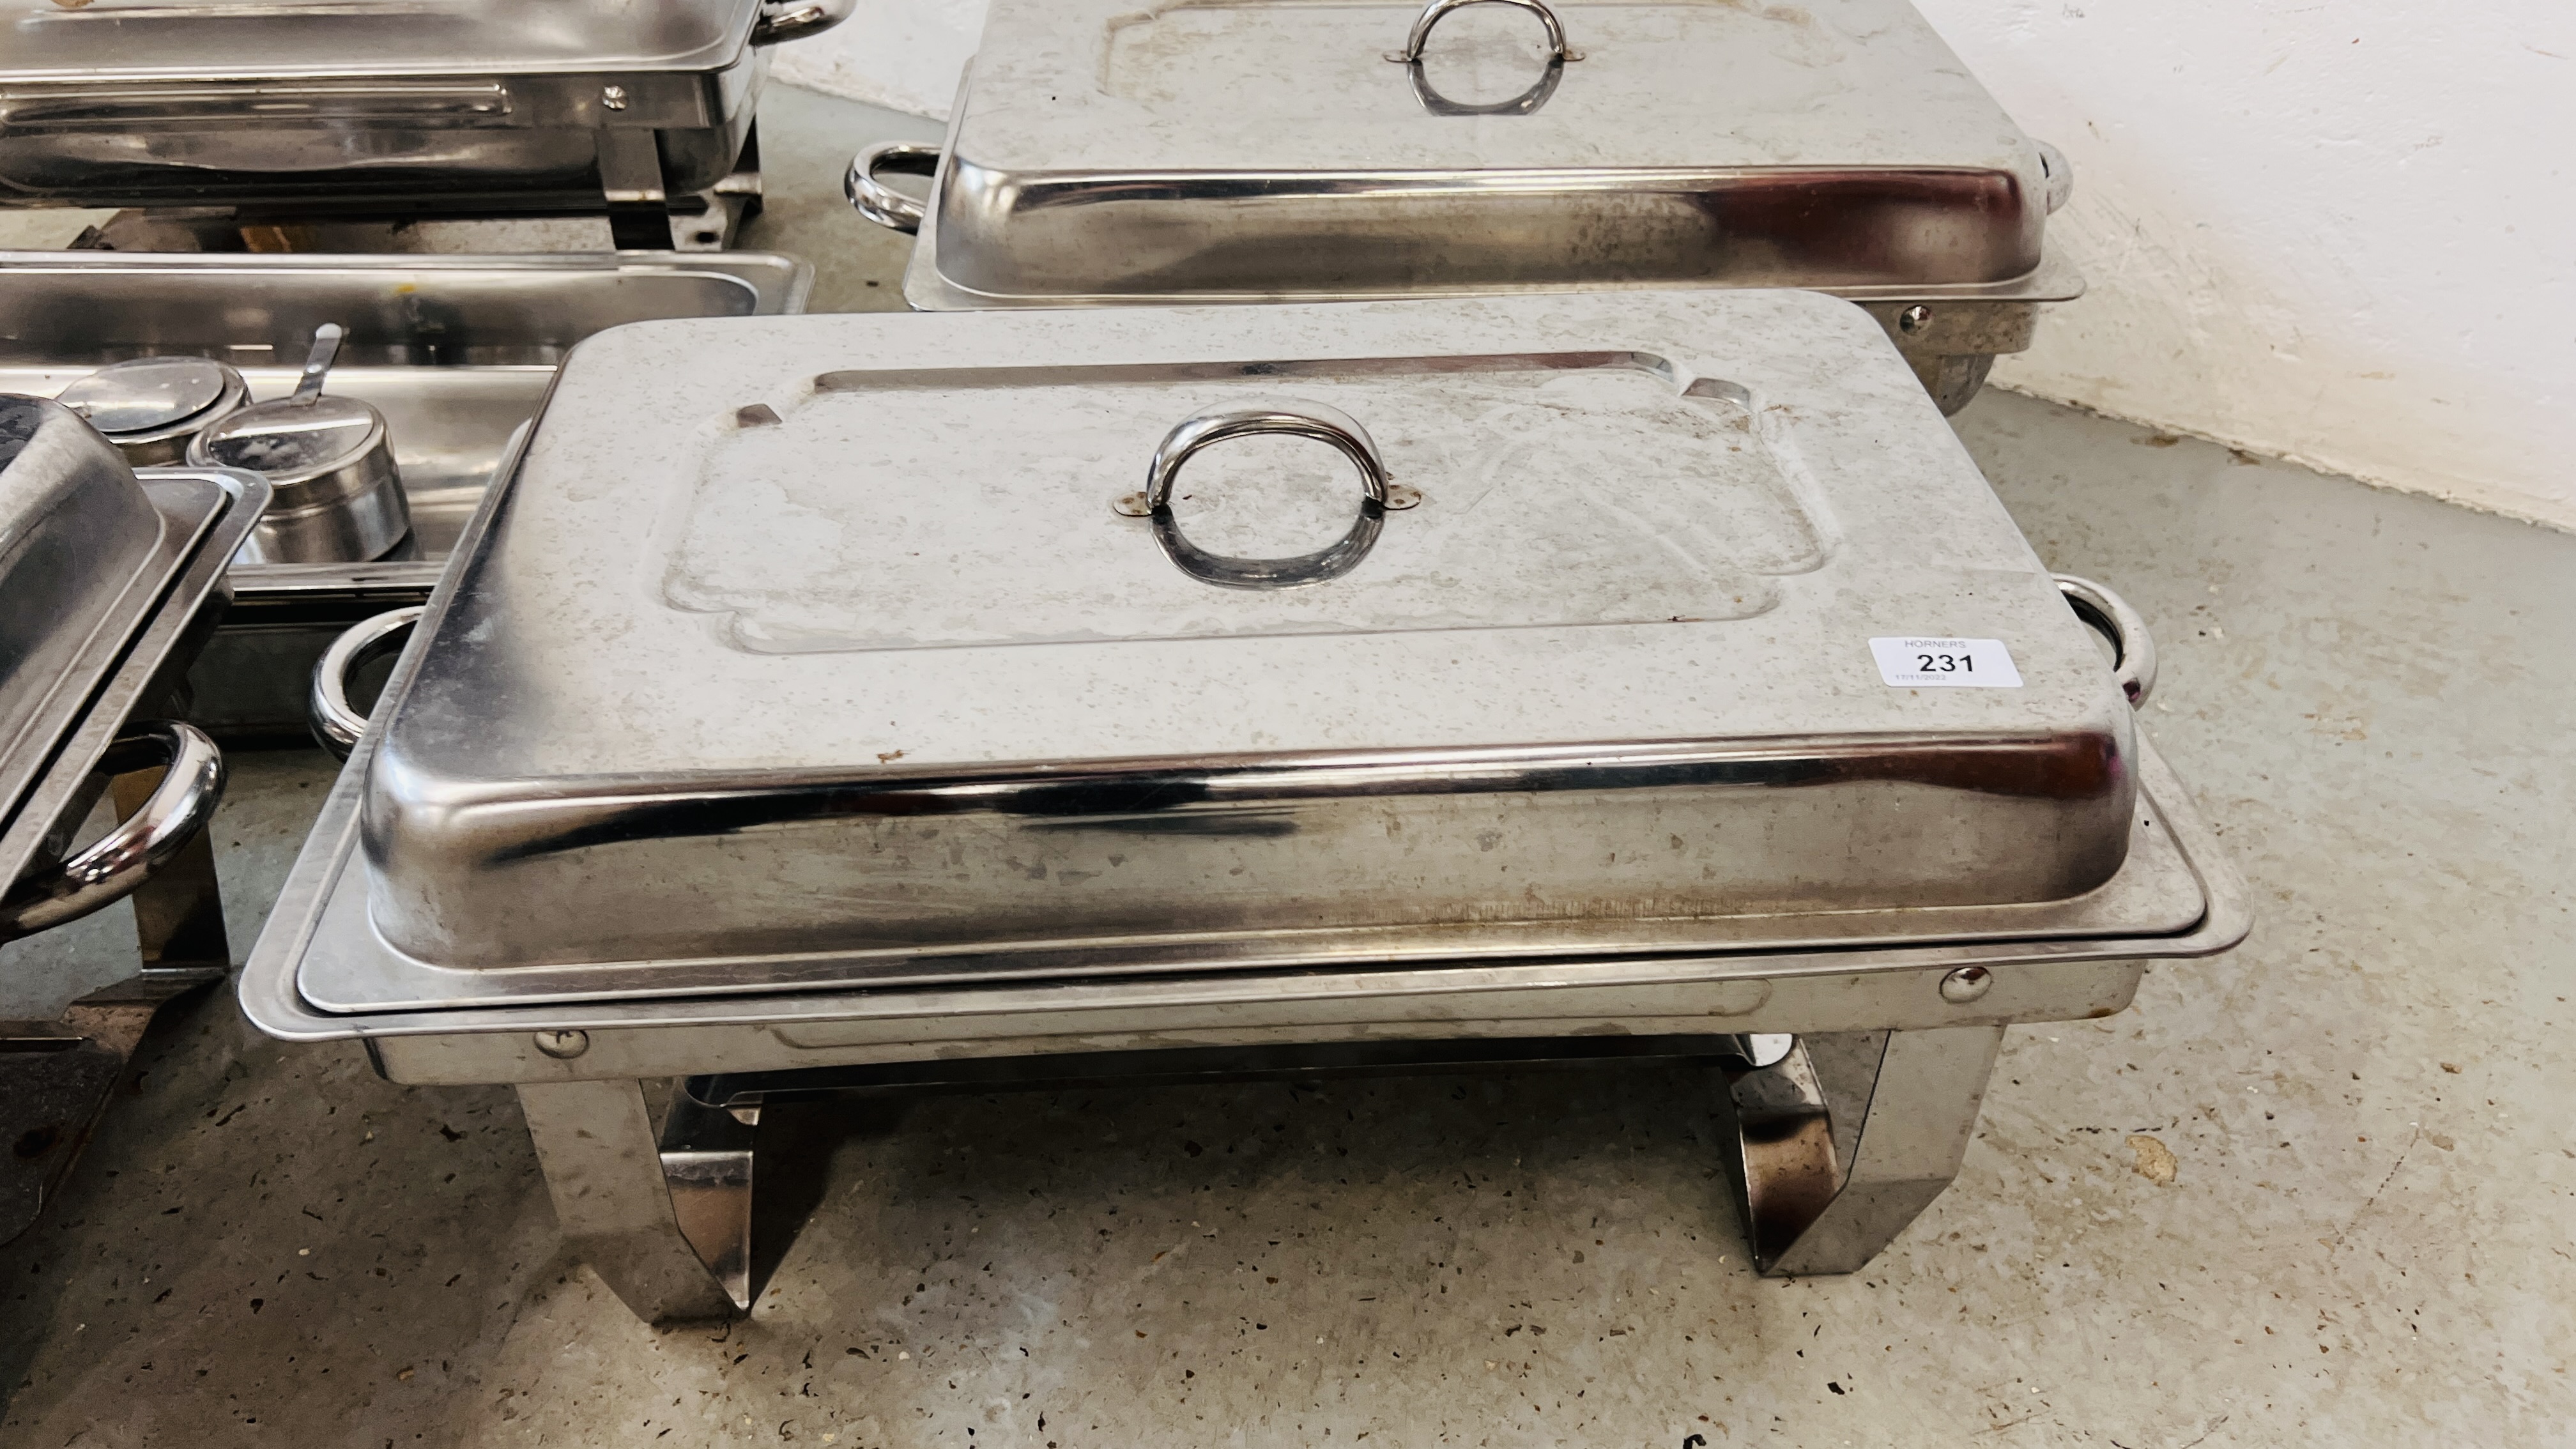 A GROUP OF FOUR STAINLESS STEEL CHAFING DISHES ALONG WITH A FURTHER FOUR TRAYS AND THREE BURNERS. - Image 2 of 6